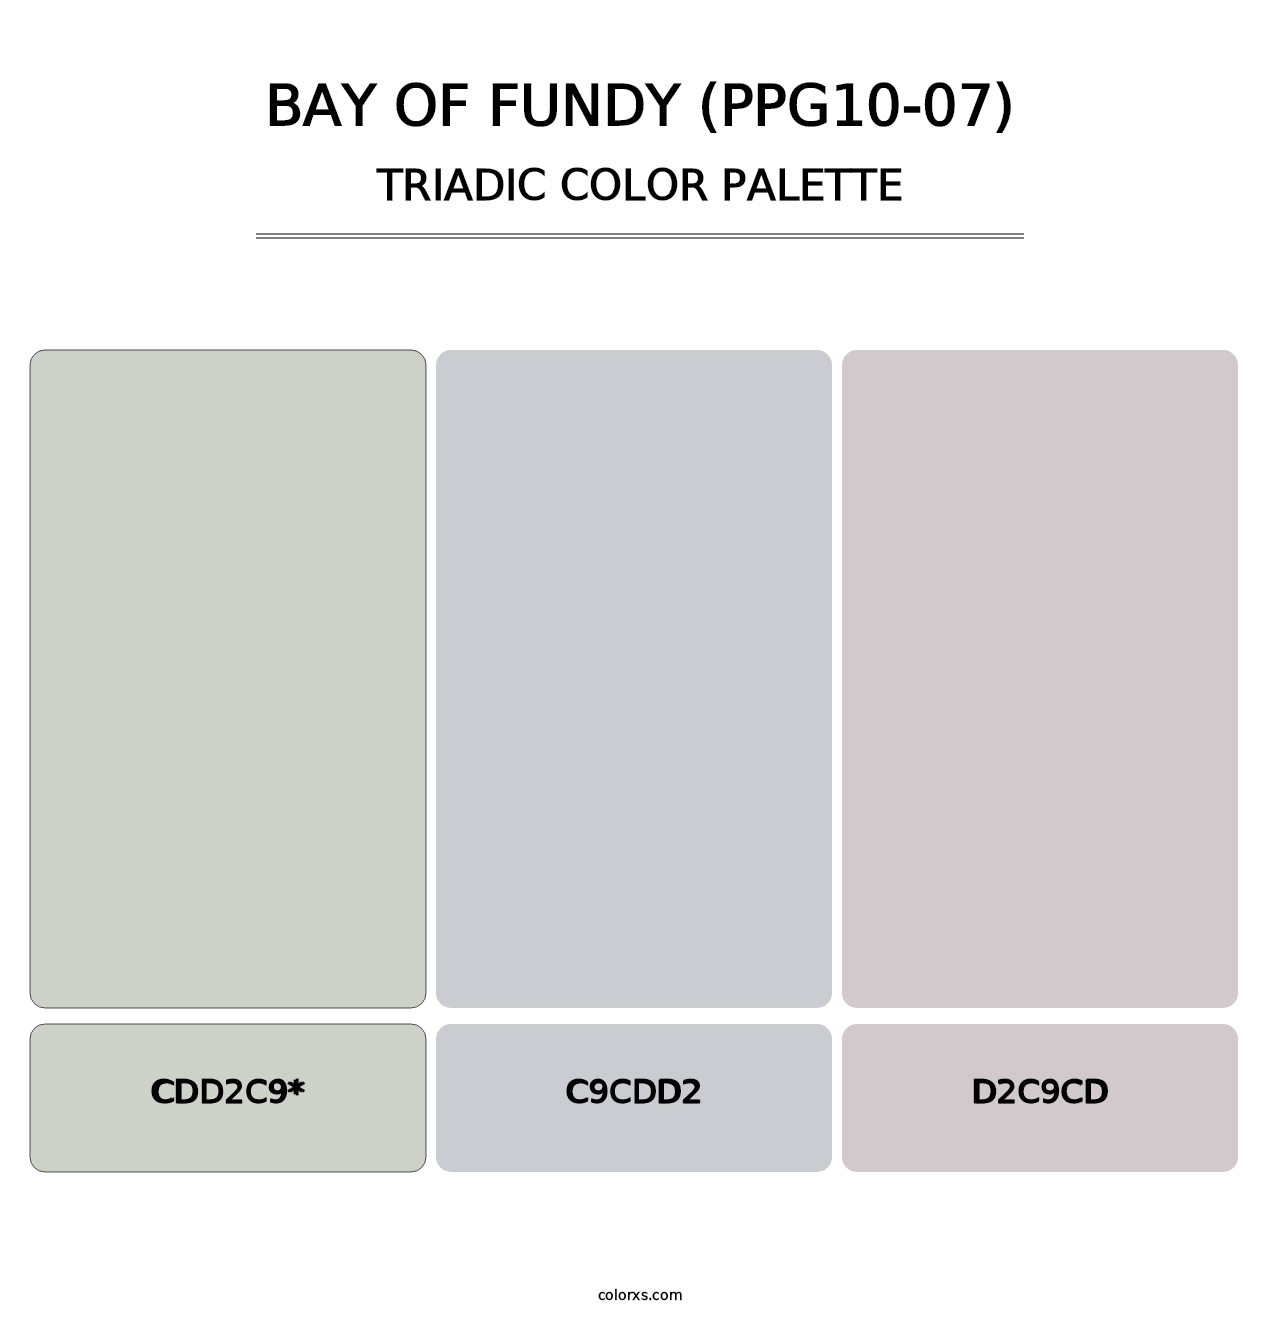 Bay Of Fundy (PPG10-07) - Triadic Color Palette